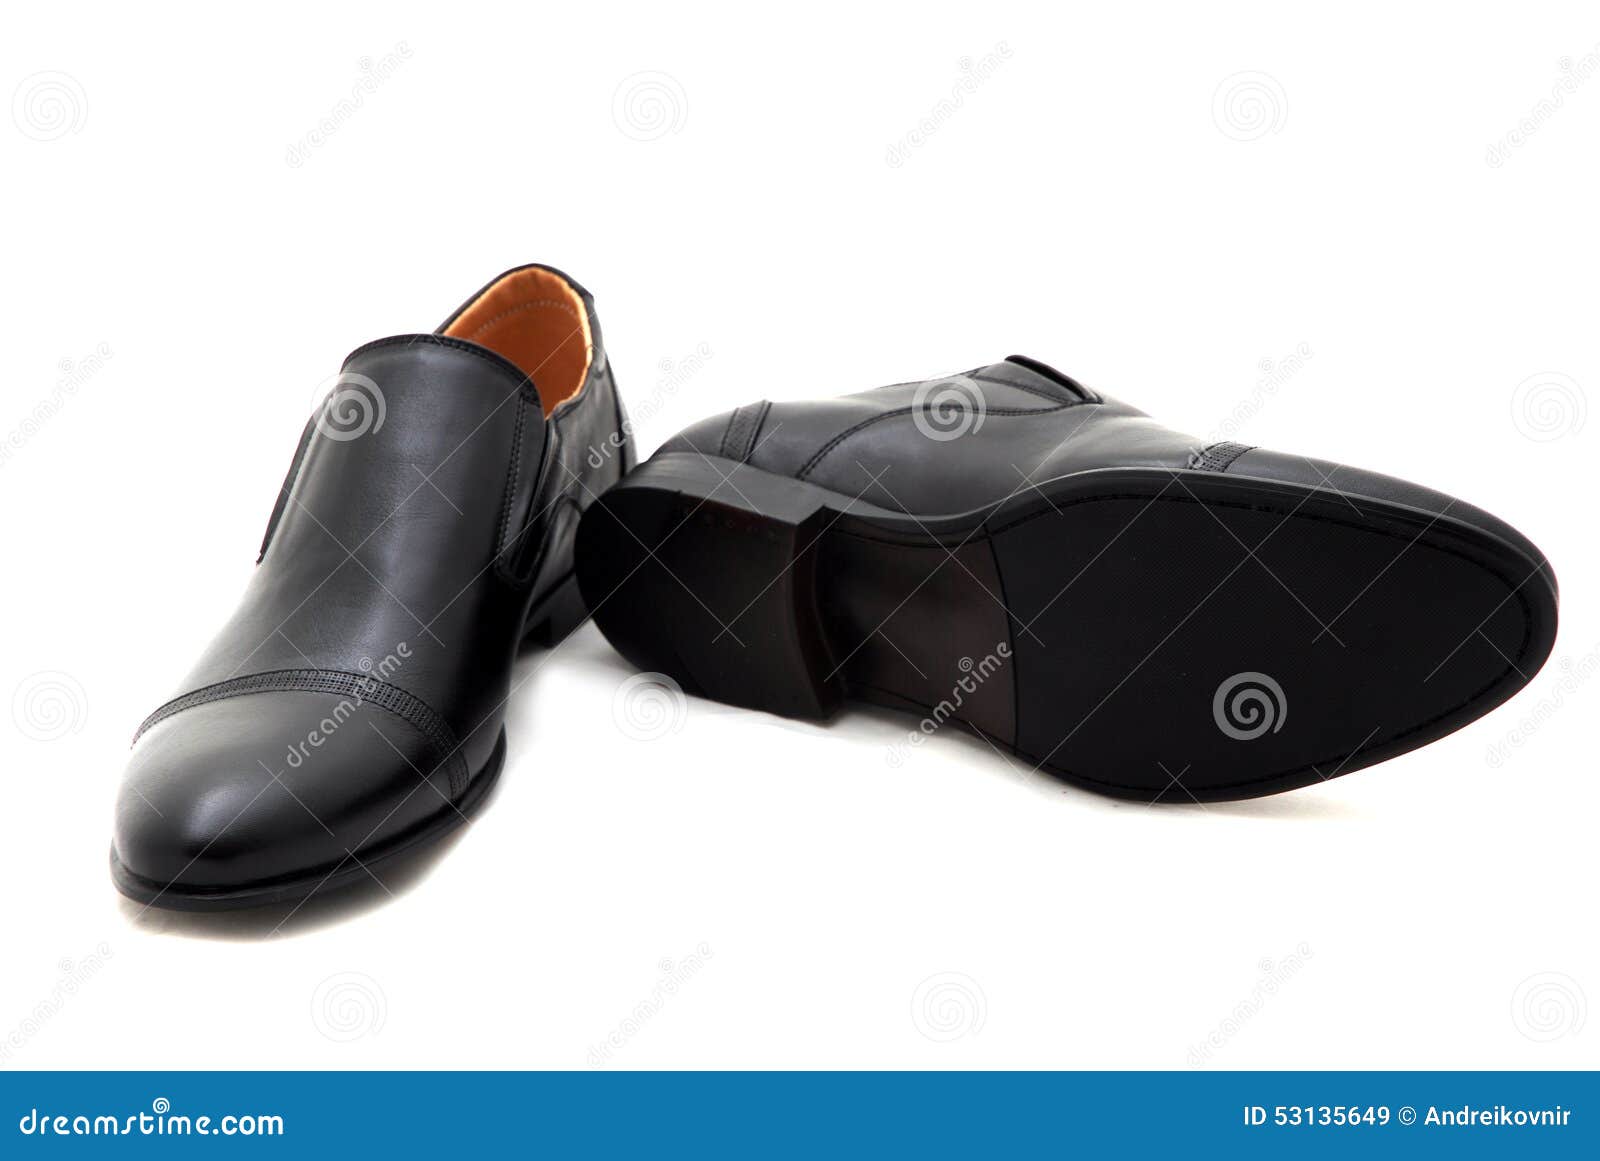 Classic Leather Men Shoes Isolated on White Stock Image - Image of ...